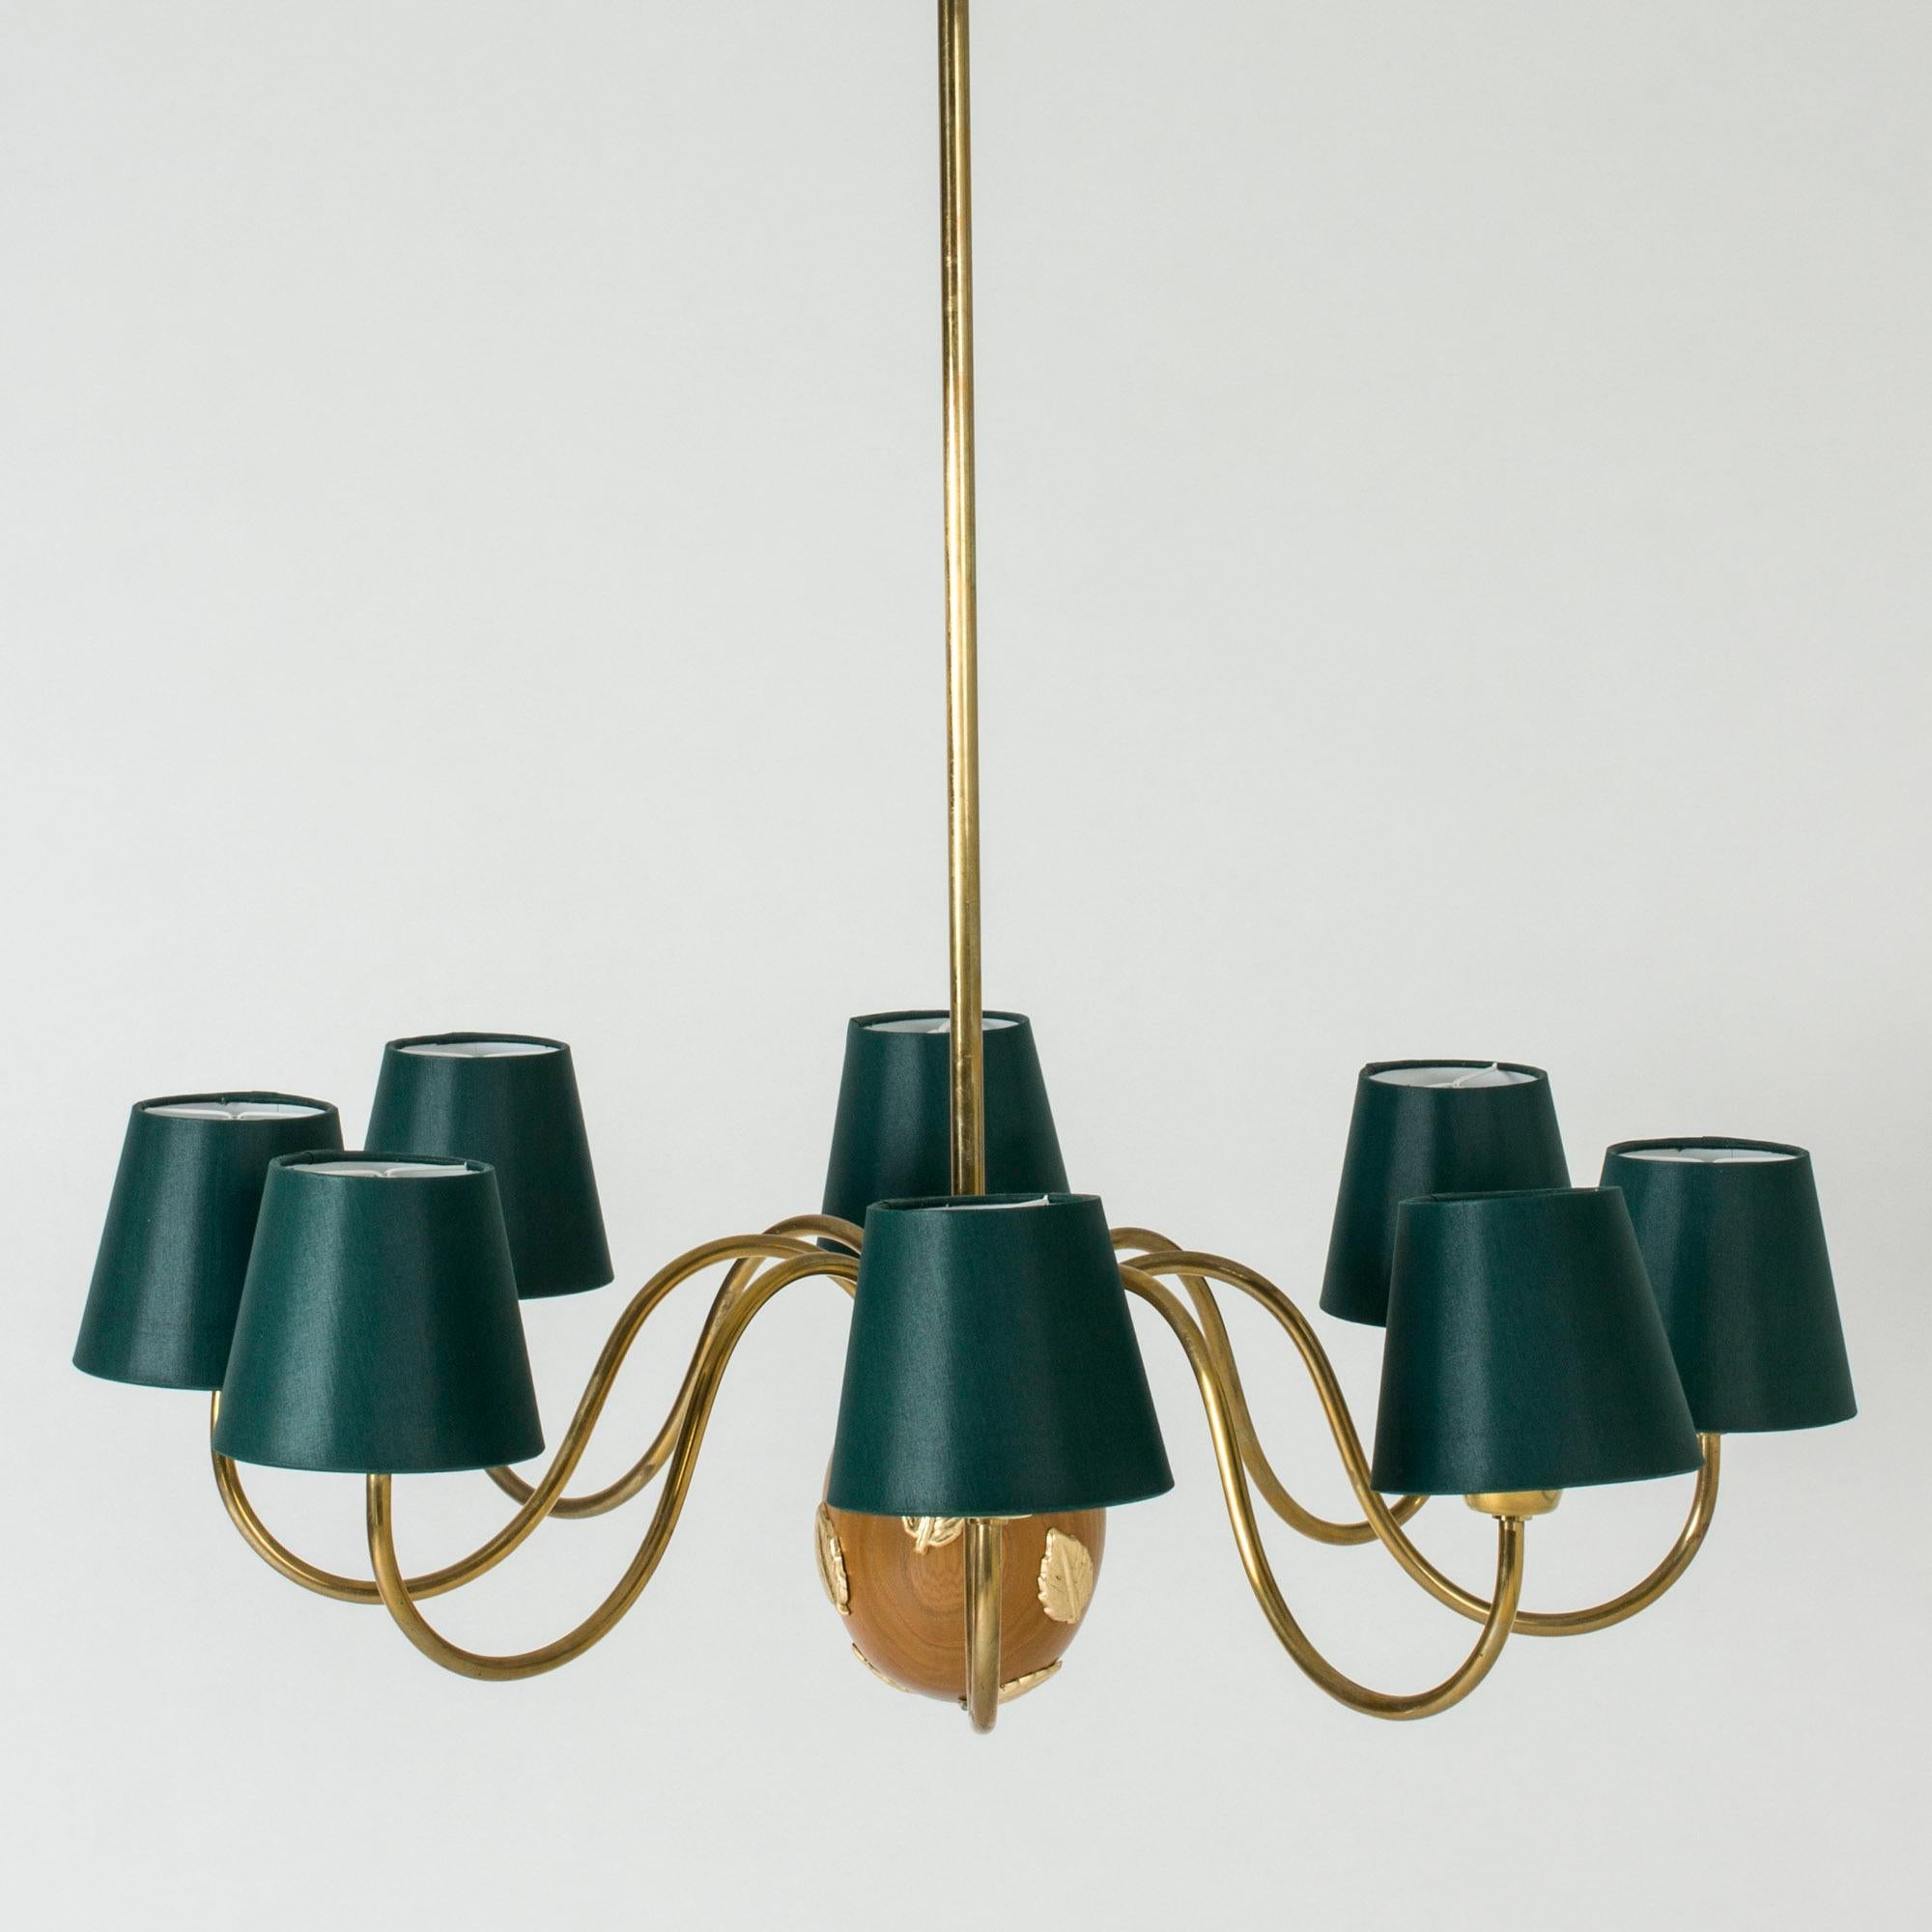 Vivacious brass chandelier with eight arms by Hans Bergström. The center of the chandelier is an acorn-shaped mahogany piece, decorated with beautiful brass leaves.